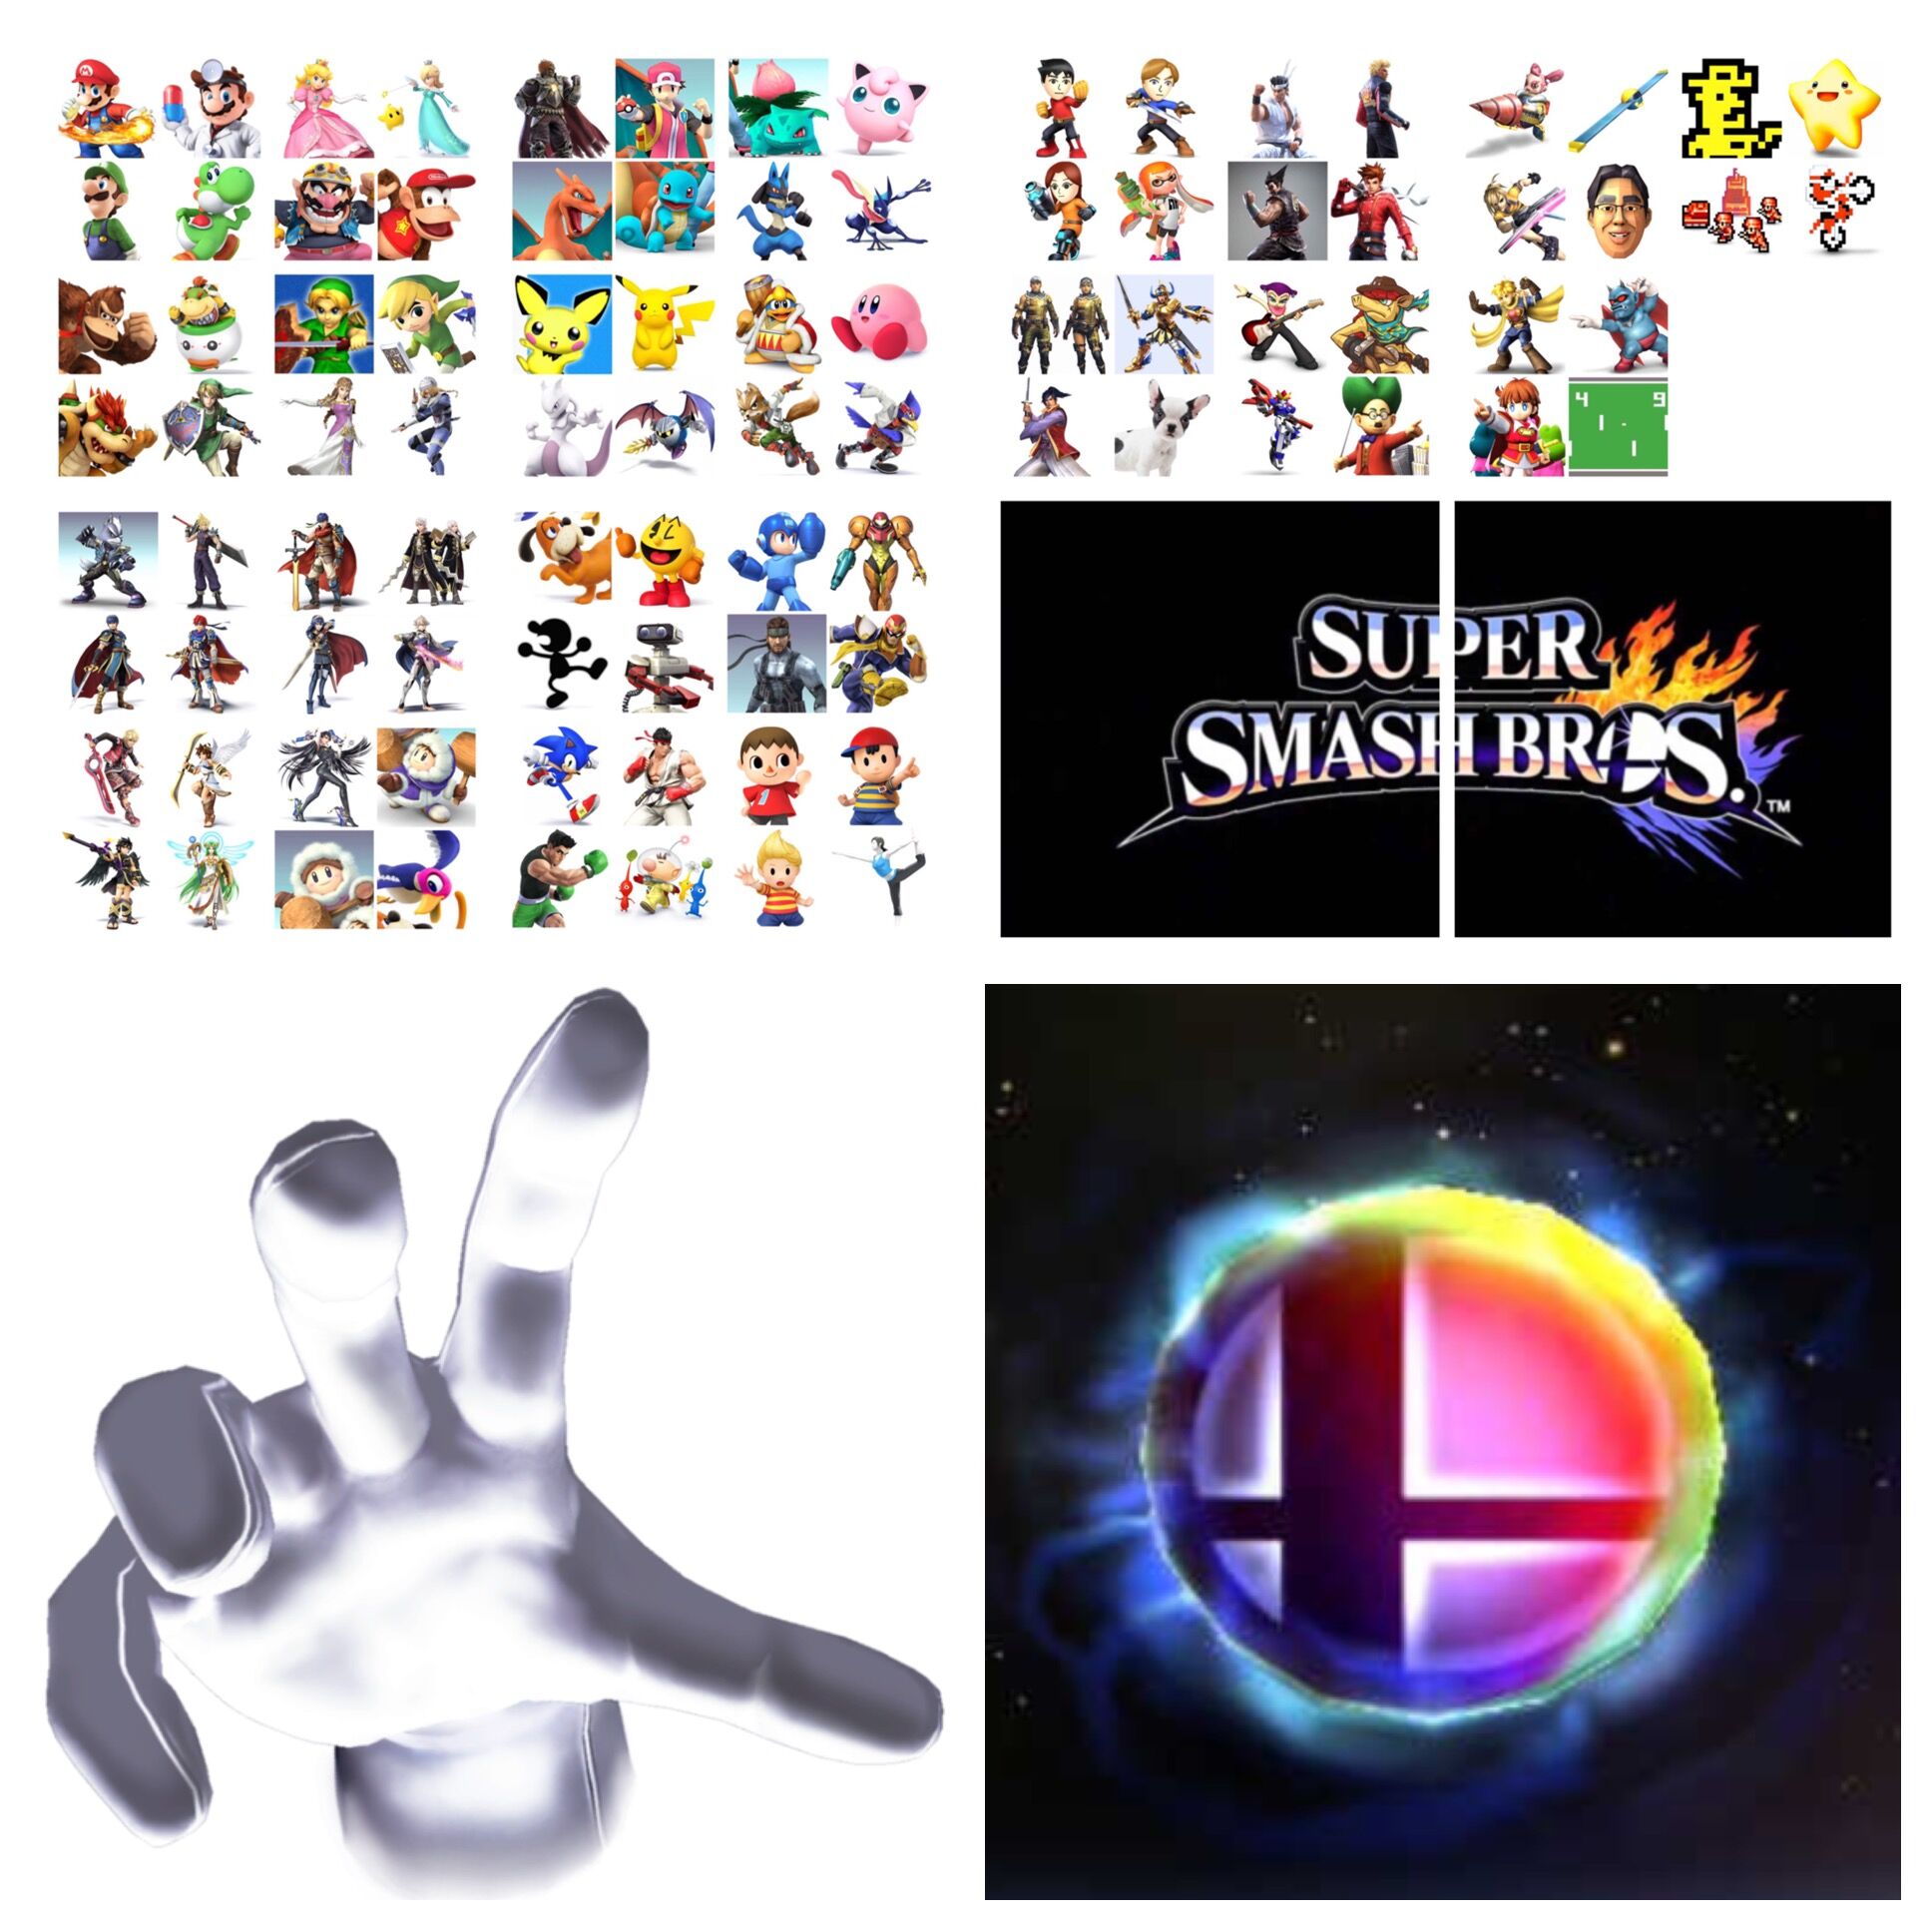 Tier List based on Rat Race or a Amazing setting : r/SmashBrosUltimate